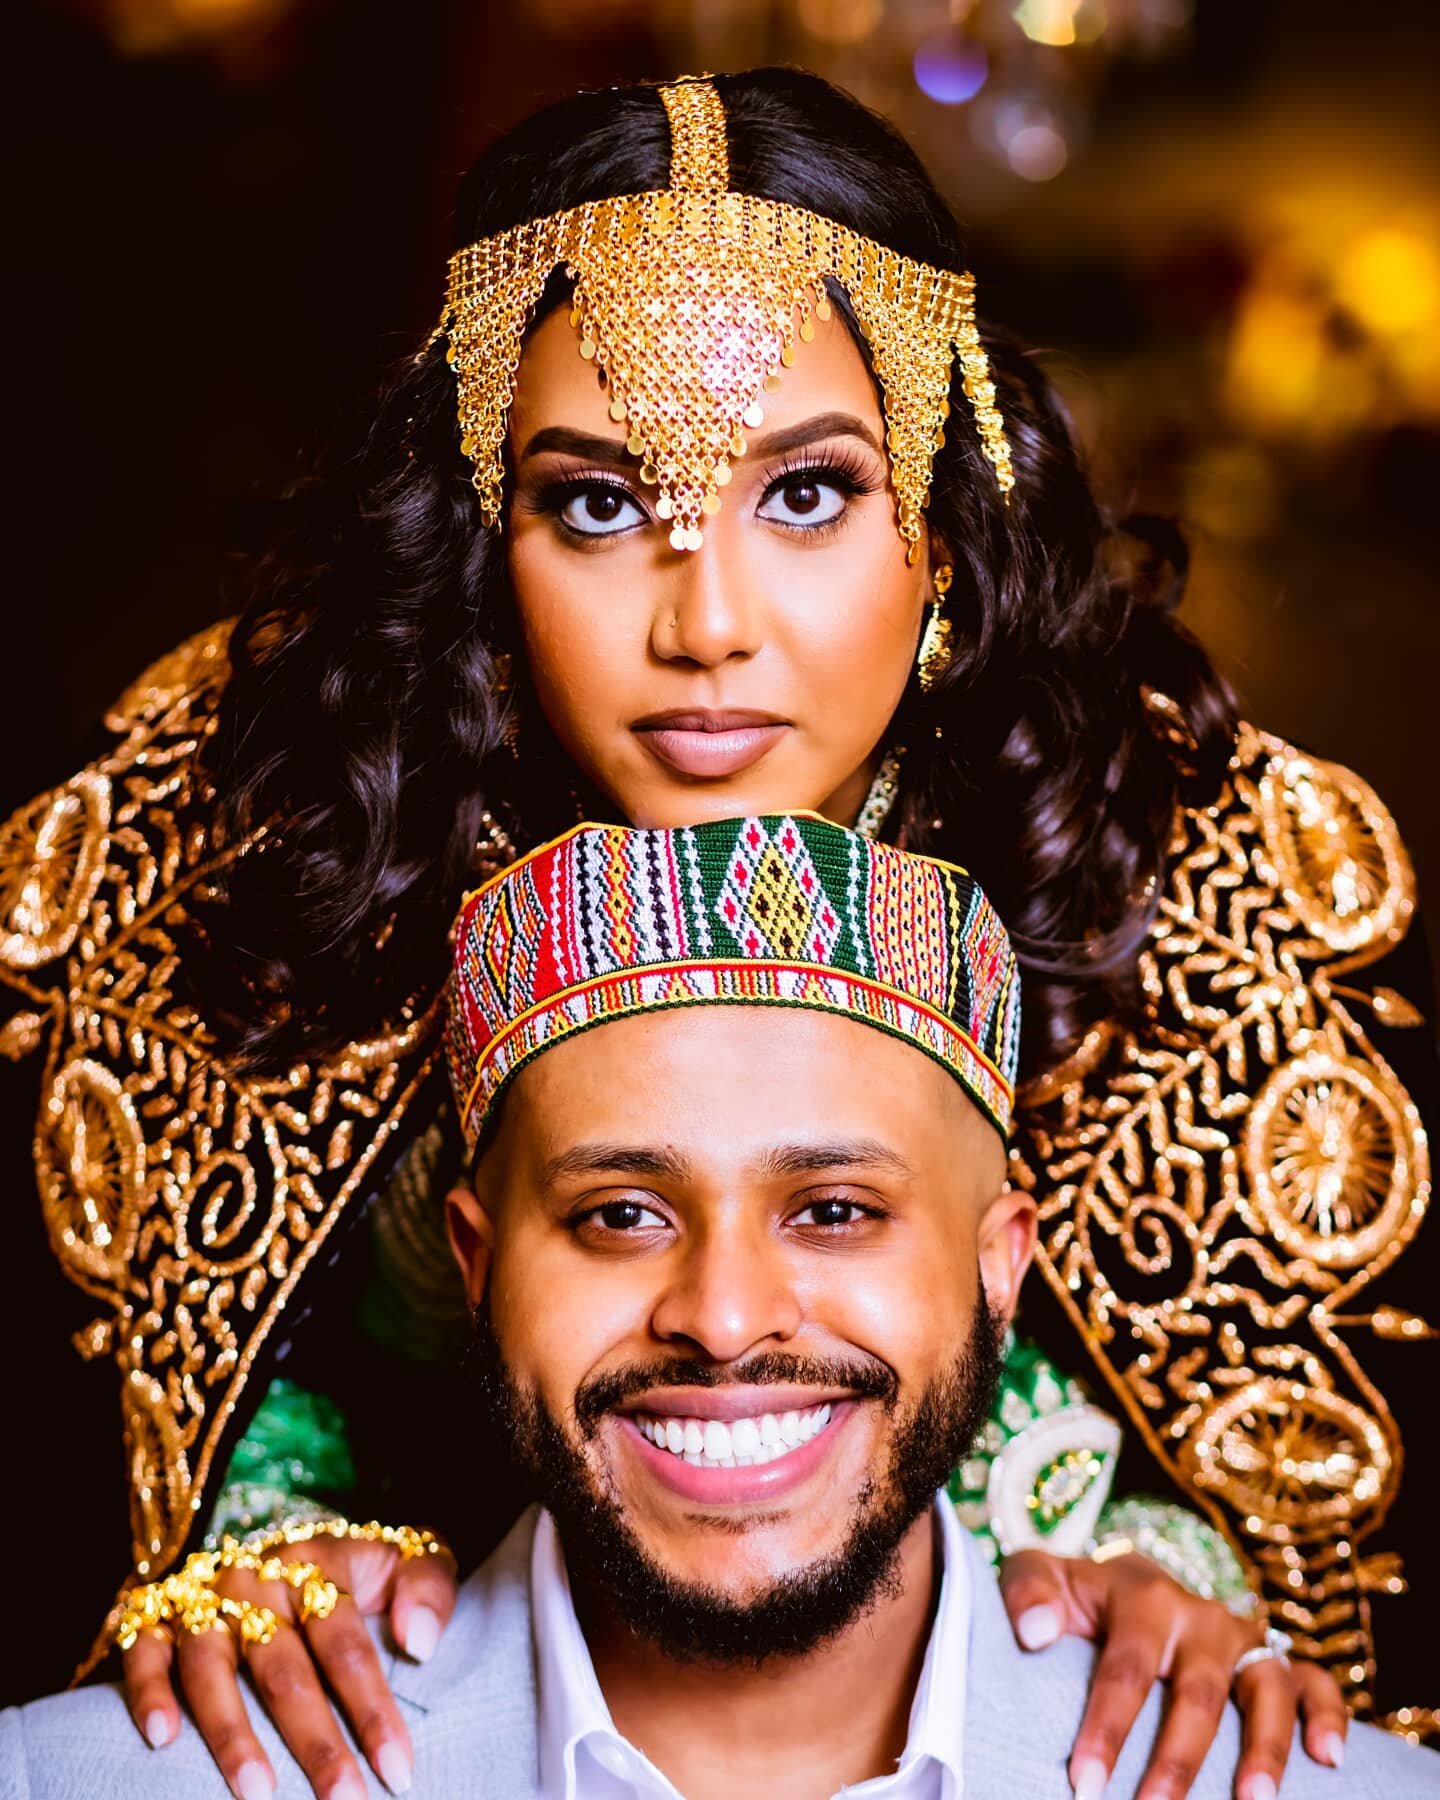 Happy Weekend to all you amazing Queens and Kings! I hope you all get to soak in the beautiful sun and fresh spring air! Just sharing this stunning image from Yasmin and Omar's e-shoot! Truly a royal couple! This is one of my favorite images. I loved